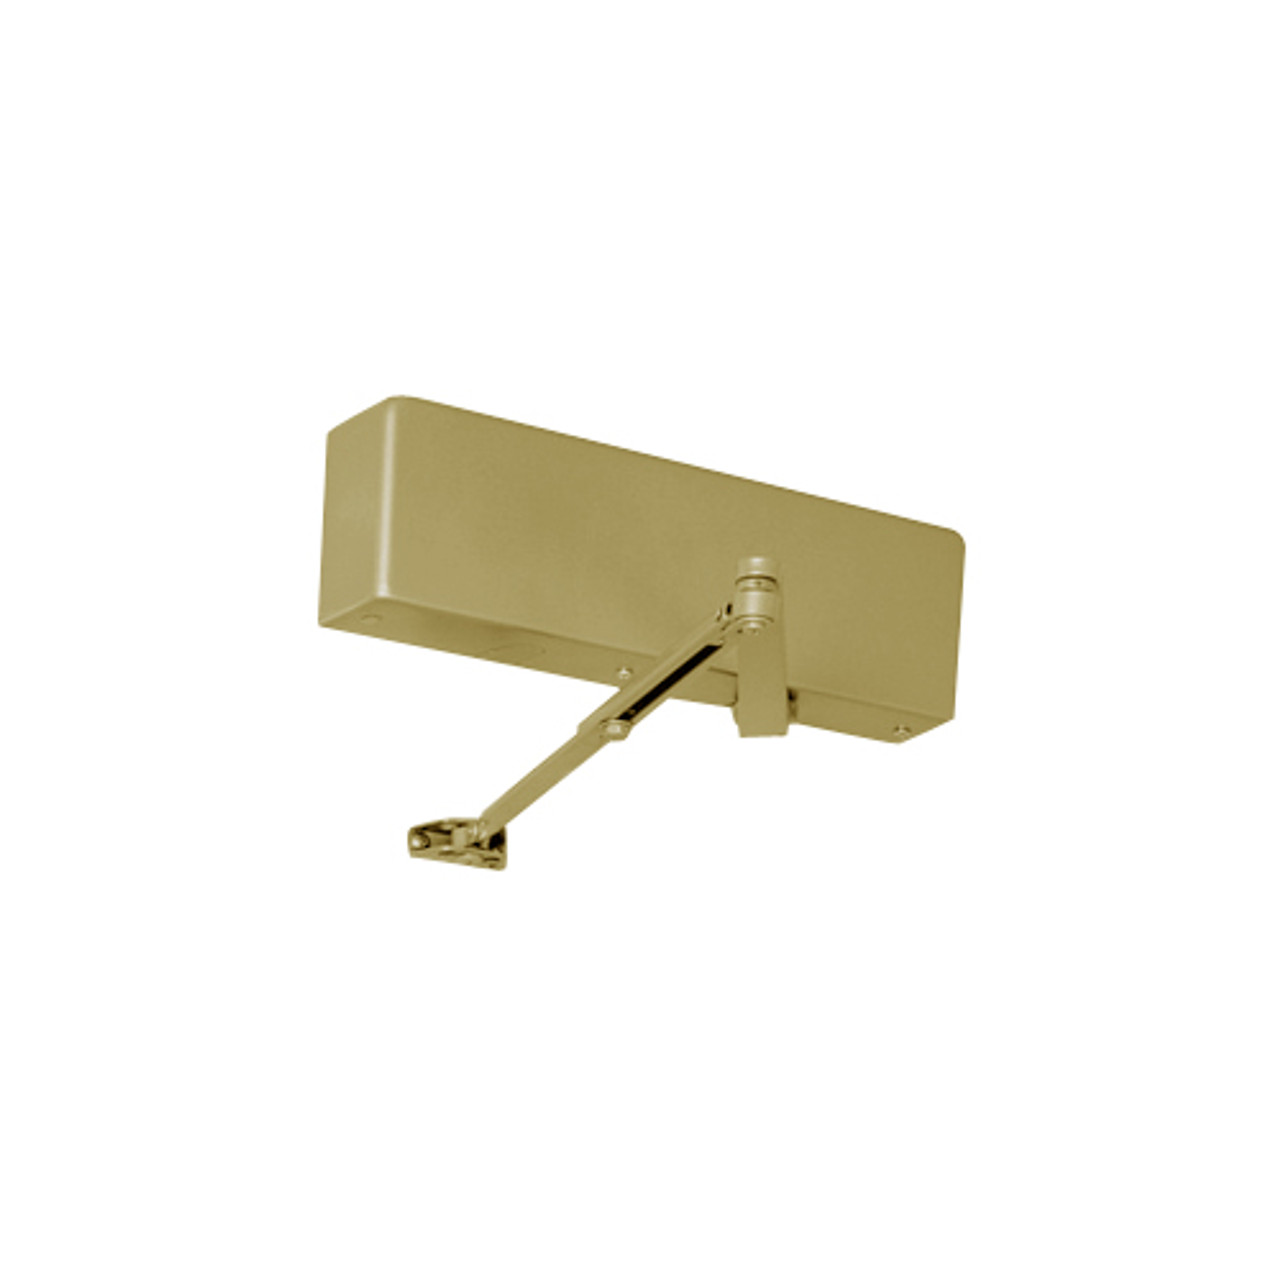 J7500M-696 Norton 7500 Series Non-Hold Open Institutional Door Closer with Top Jamb Only Reveals 2-3/4 to 7 inch to 150 Degree in Gold Finish